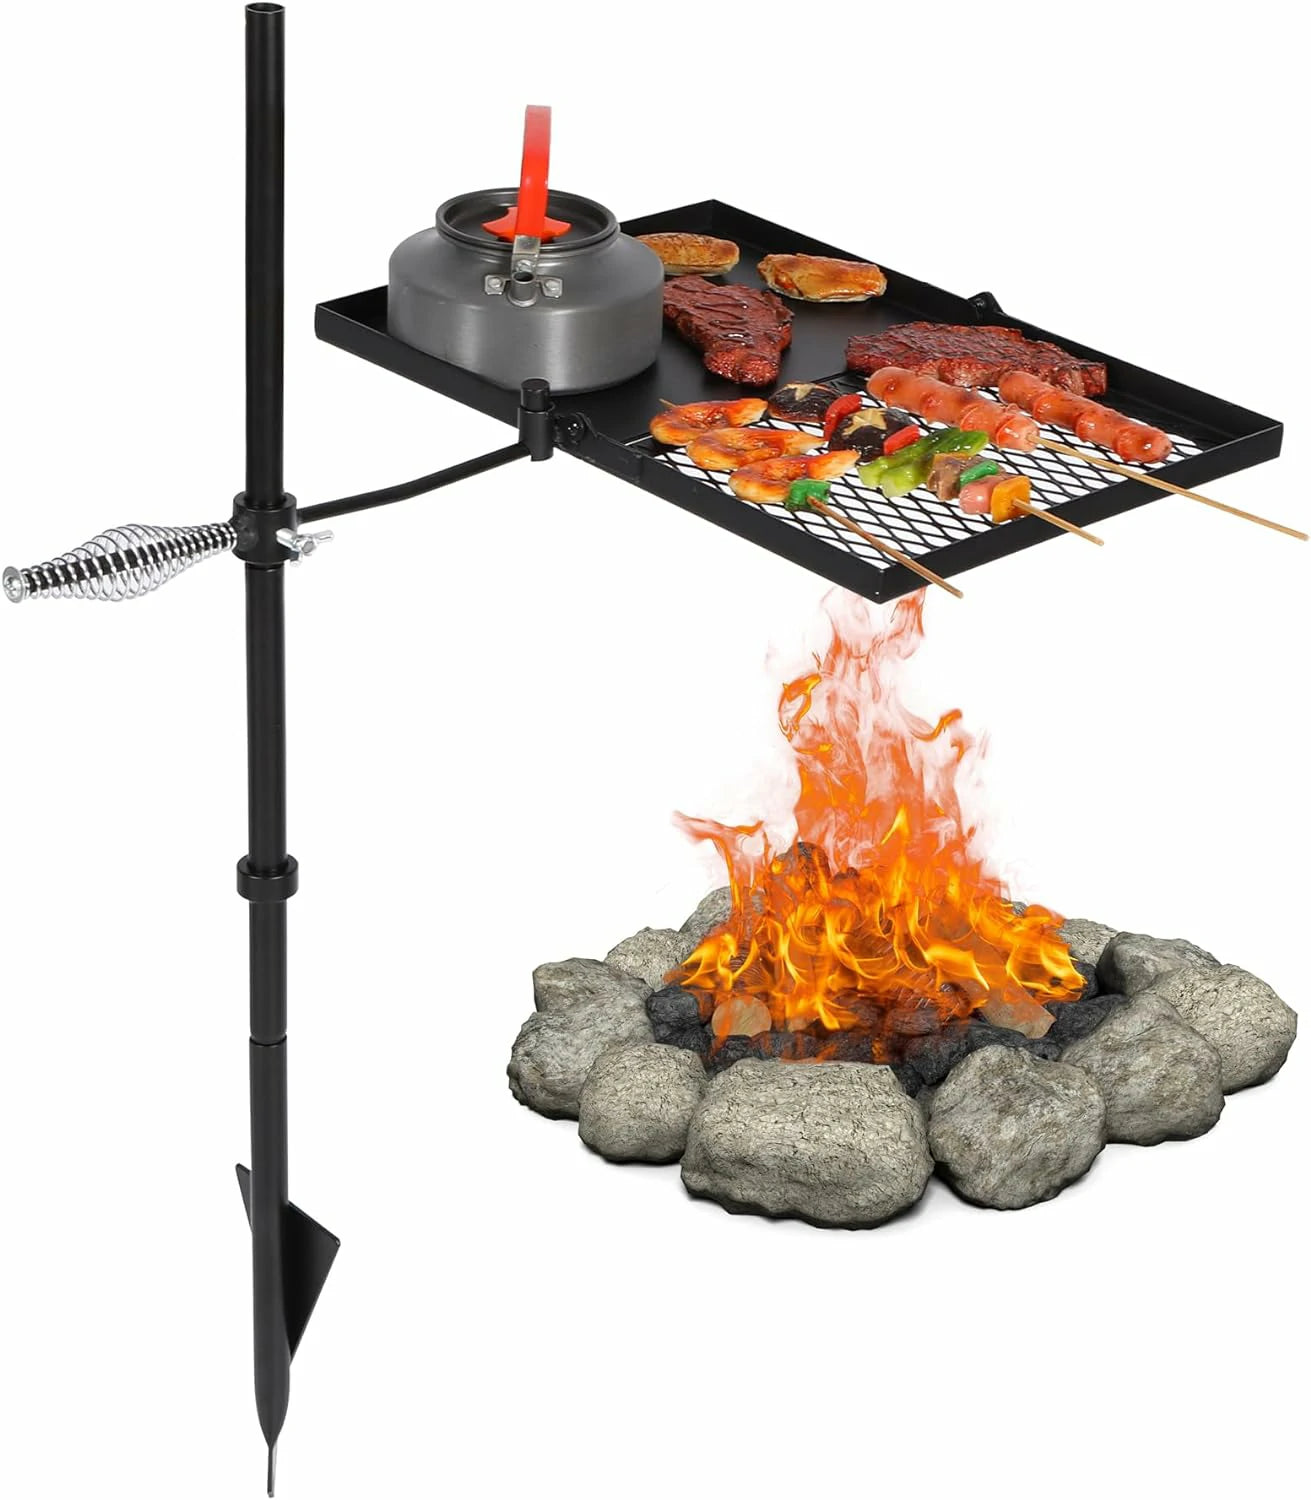 Folding Swivel Campfire Grill Heavy Duty Steel Grate with Carrying Bag for Outdoor Open Flame Cooking